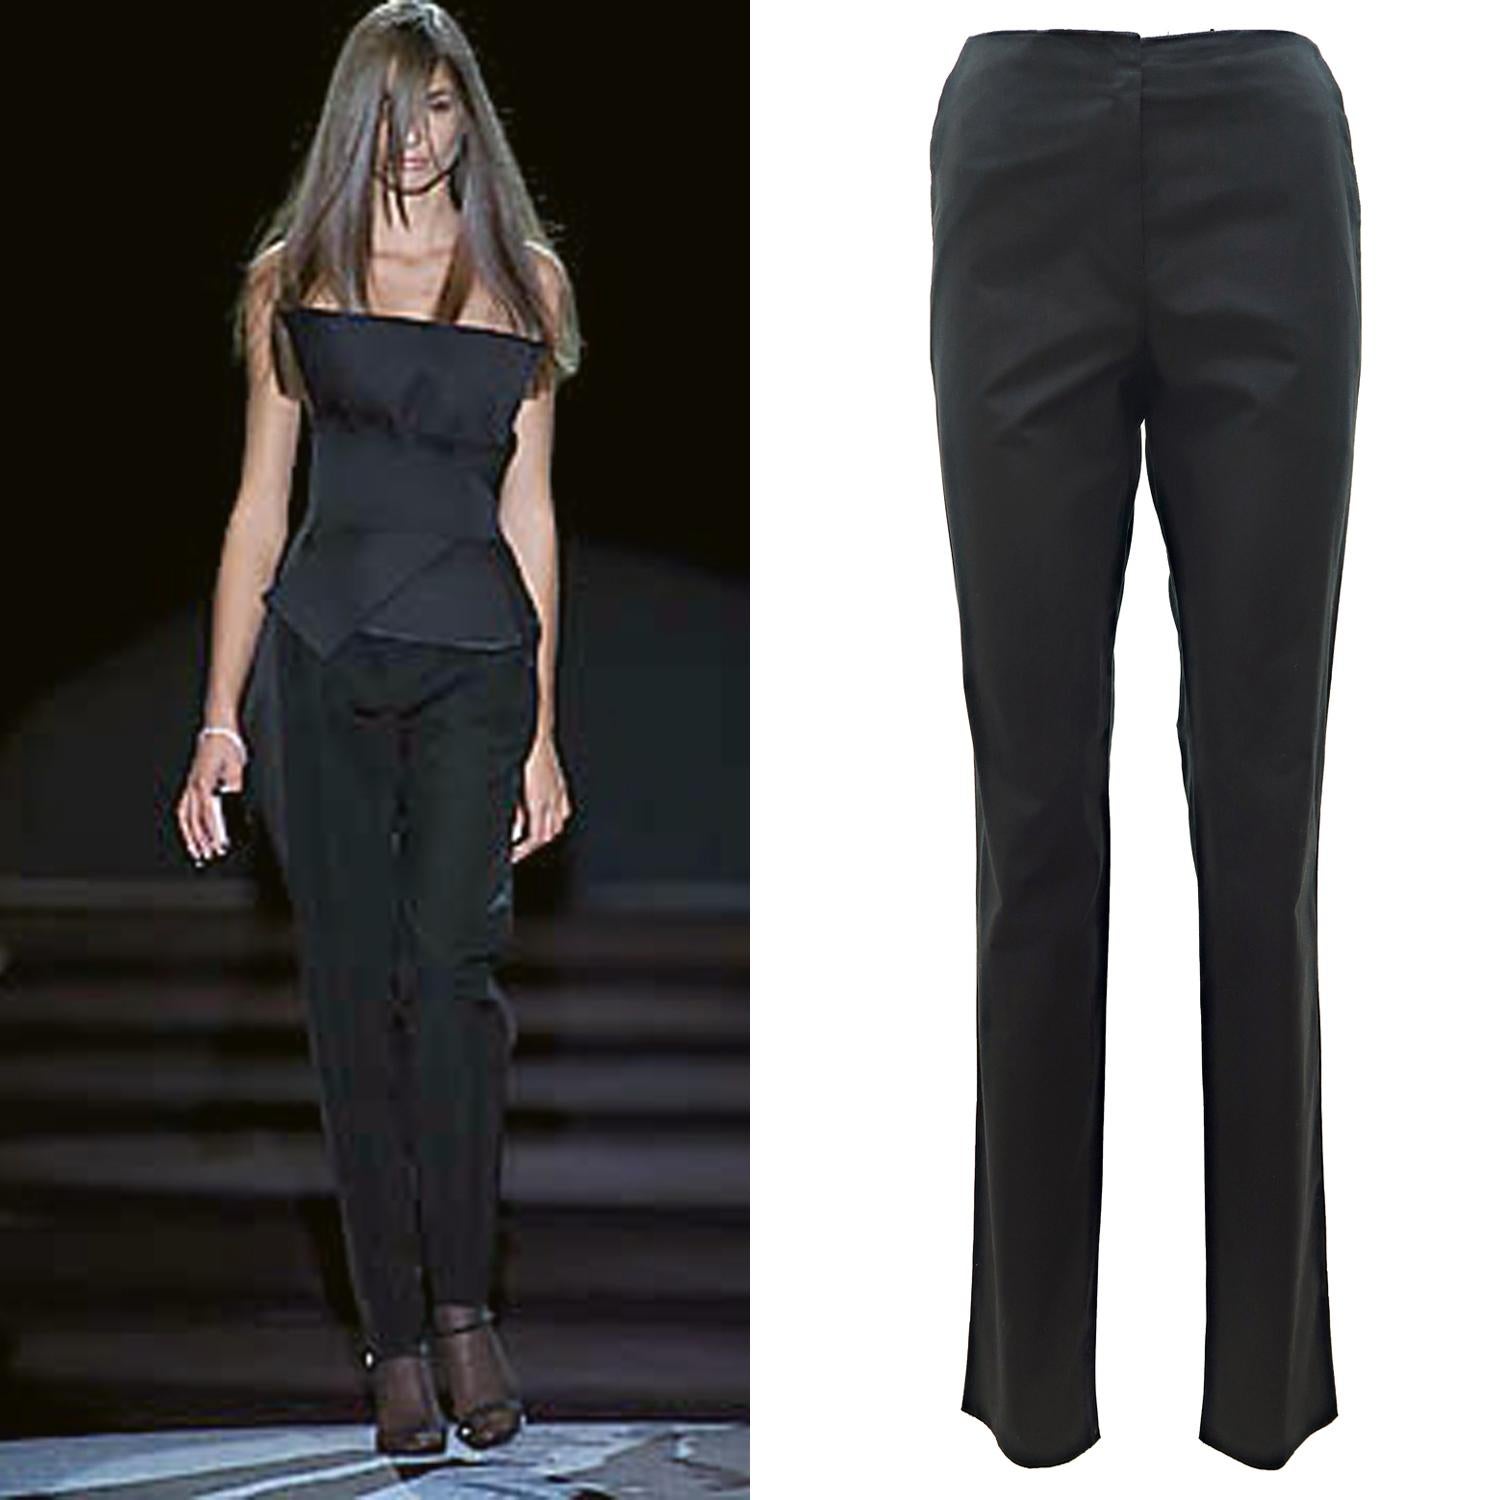 Yves Saint Laurent by Tom Ford FW-2001 Tailored Silhouette Cotton Pants 4